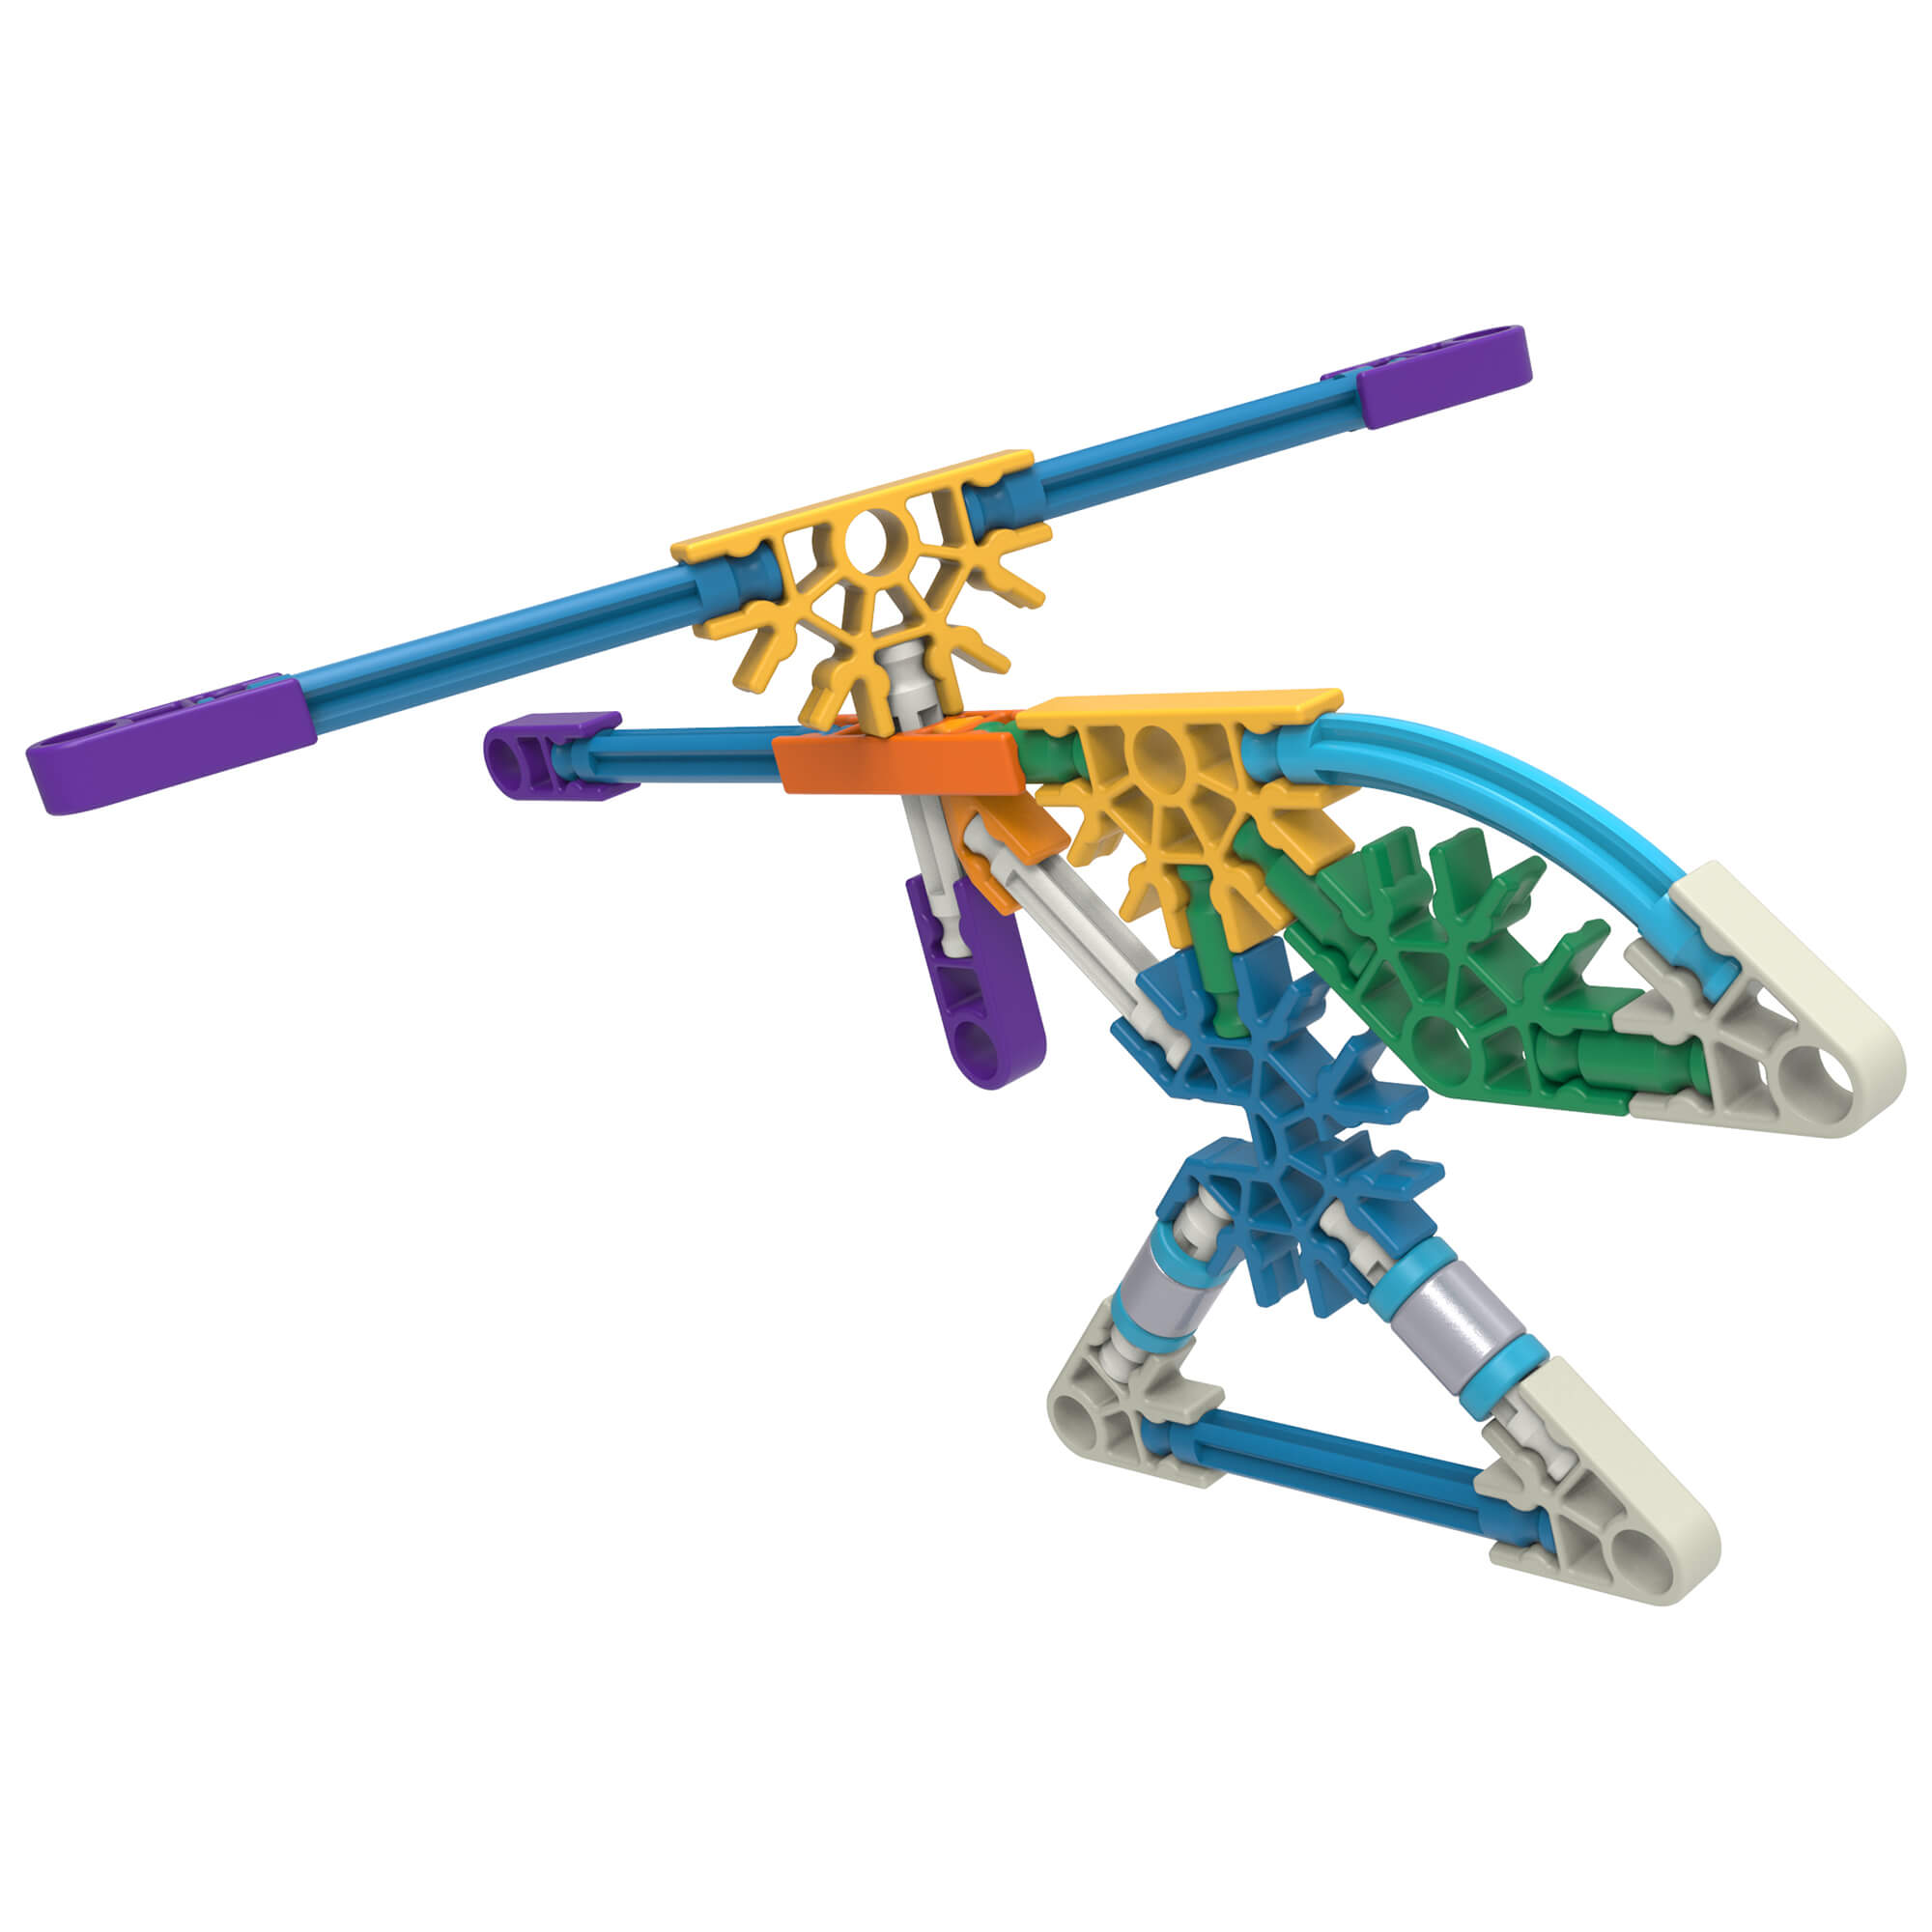 Front view of the k'nex tree.